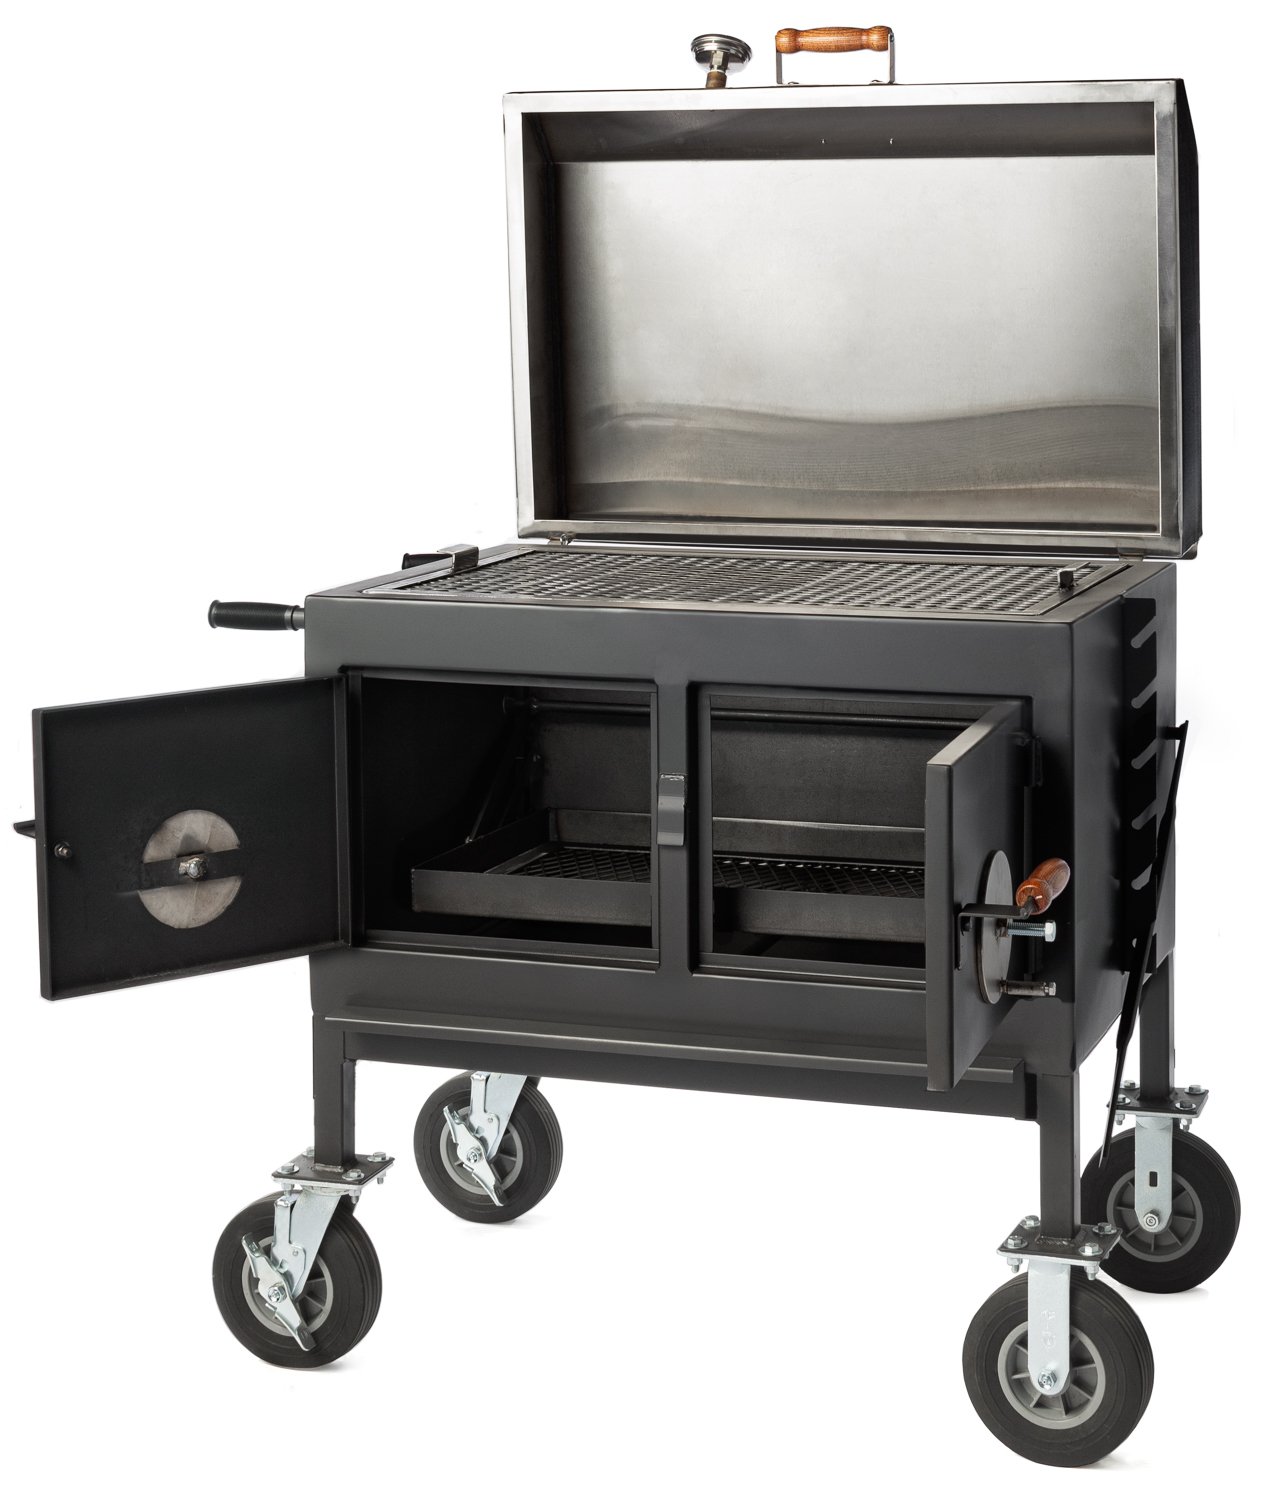 Pitts And Spitts Adjustable Charcoal Grill 24 X 36 Flat Top Smokin Deal Bbq